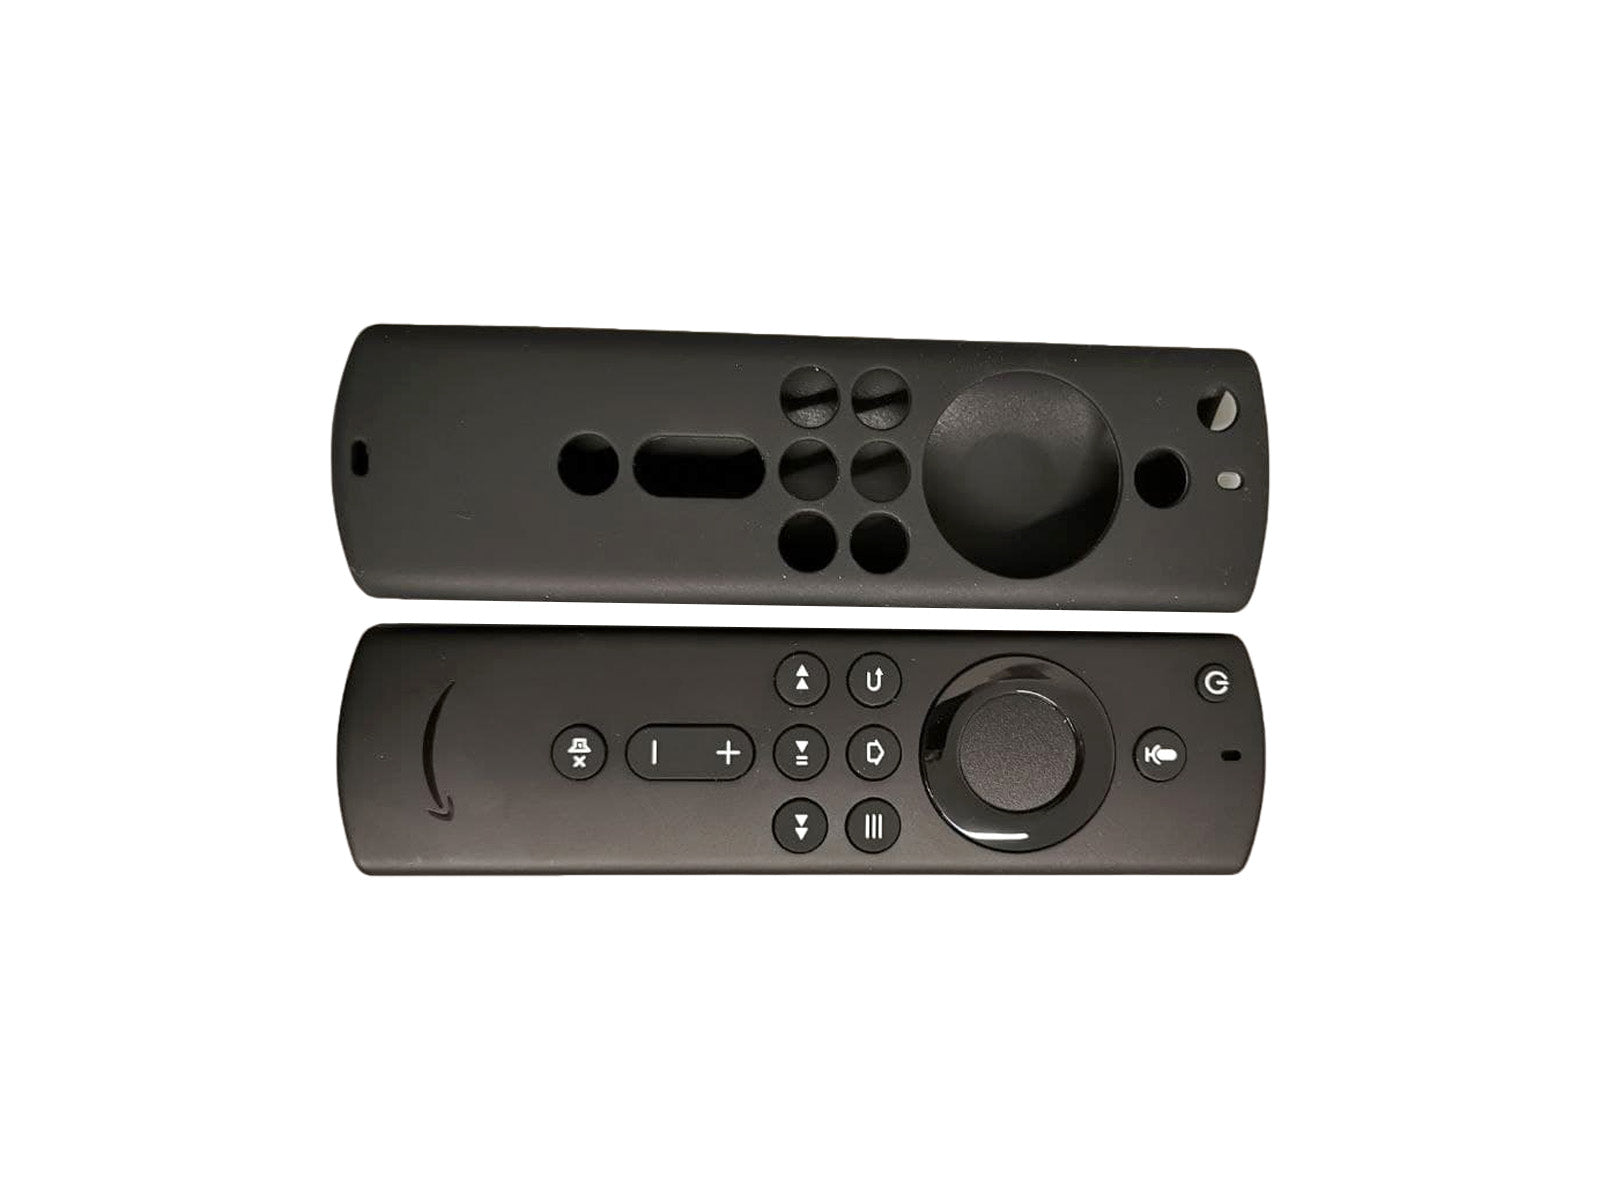 Picture showing Cover itself and the Remote control that is compatible with this cover